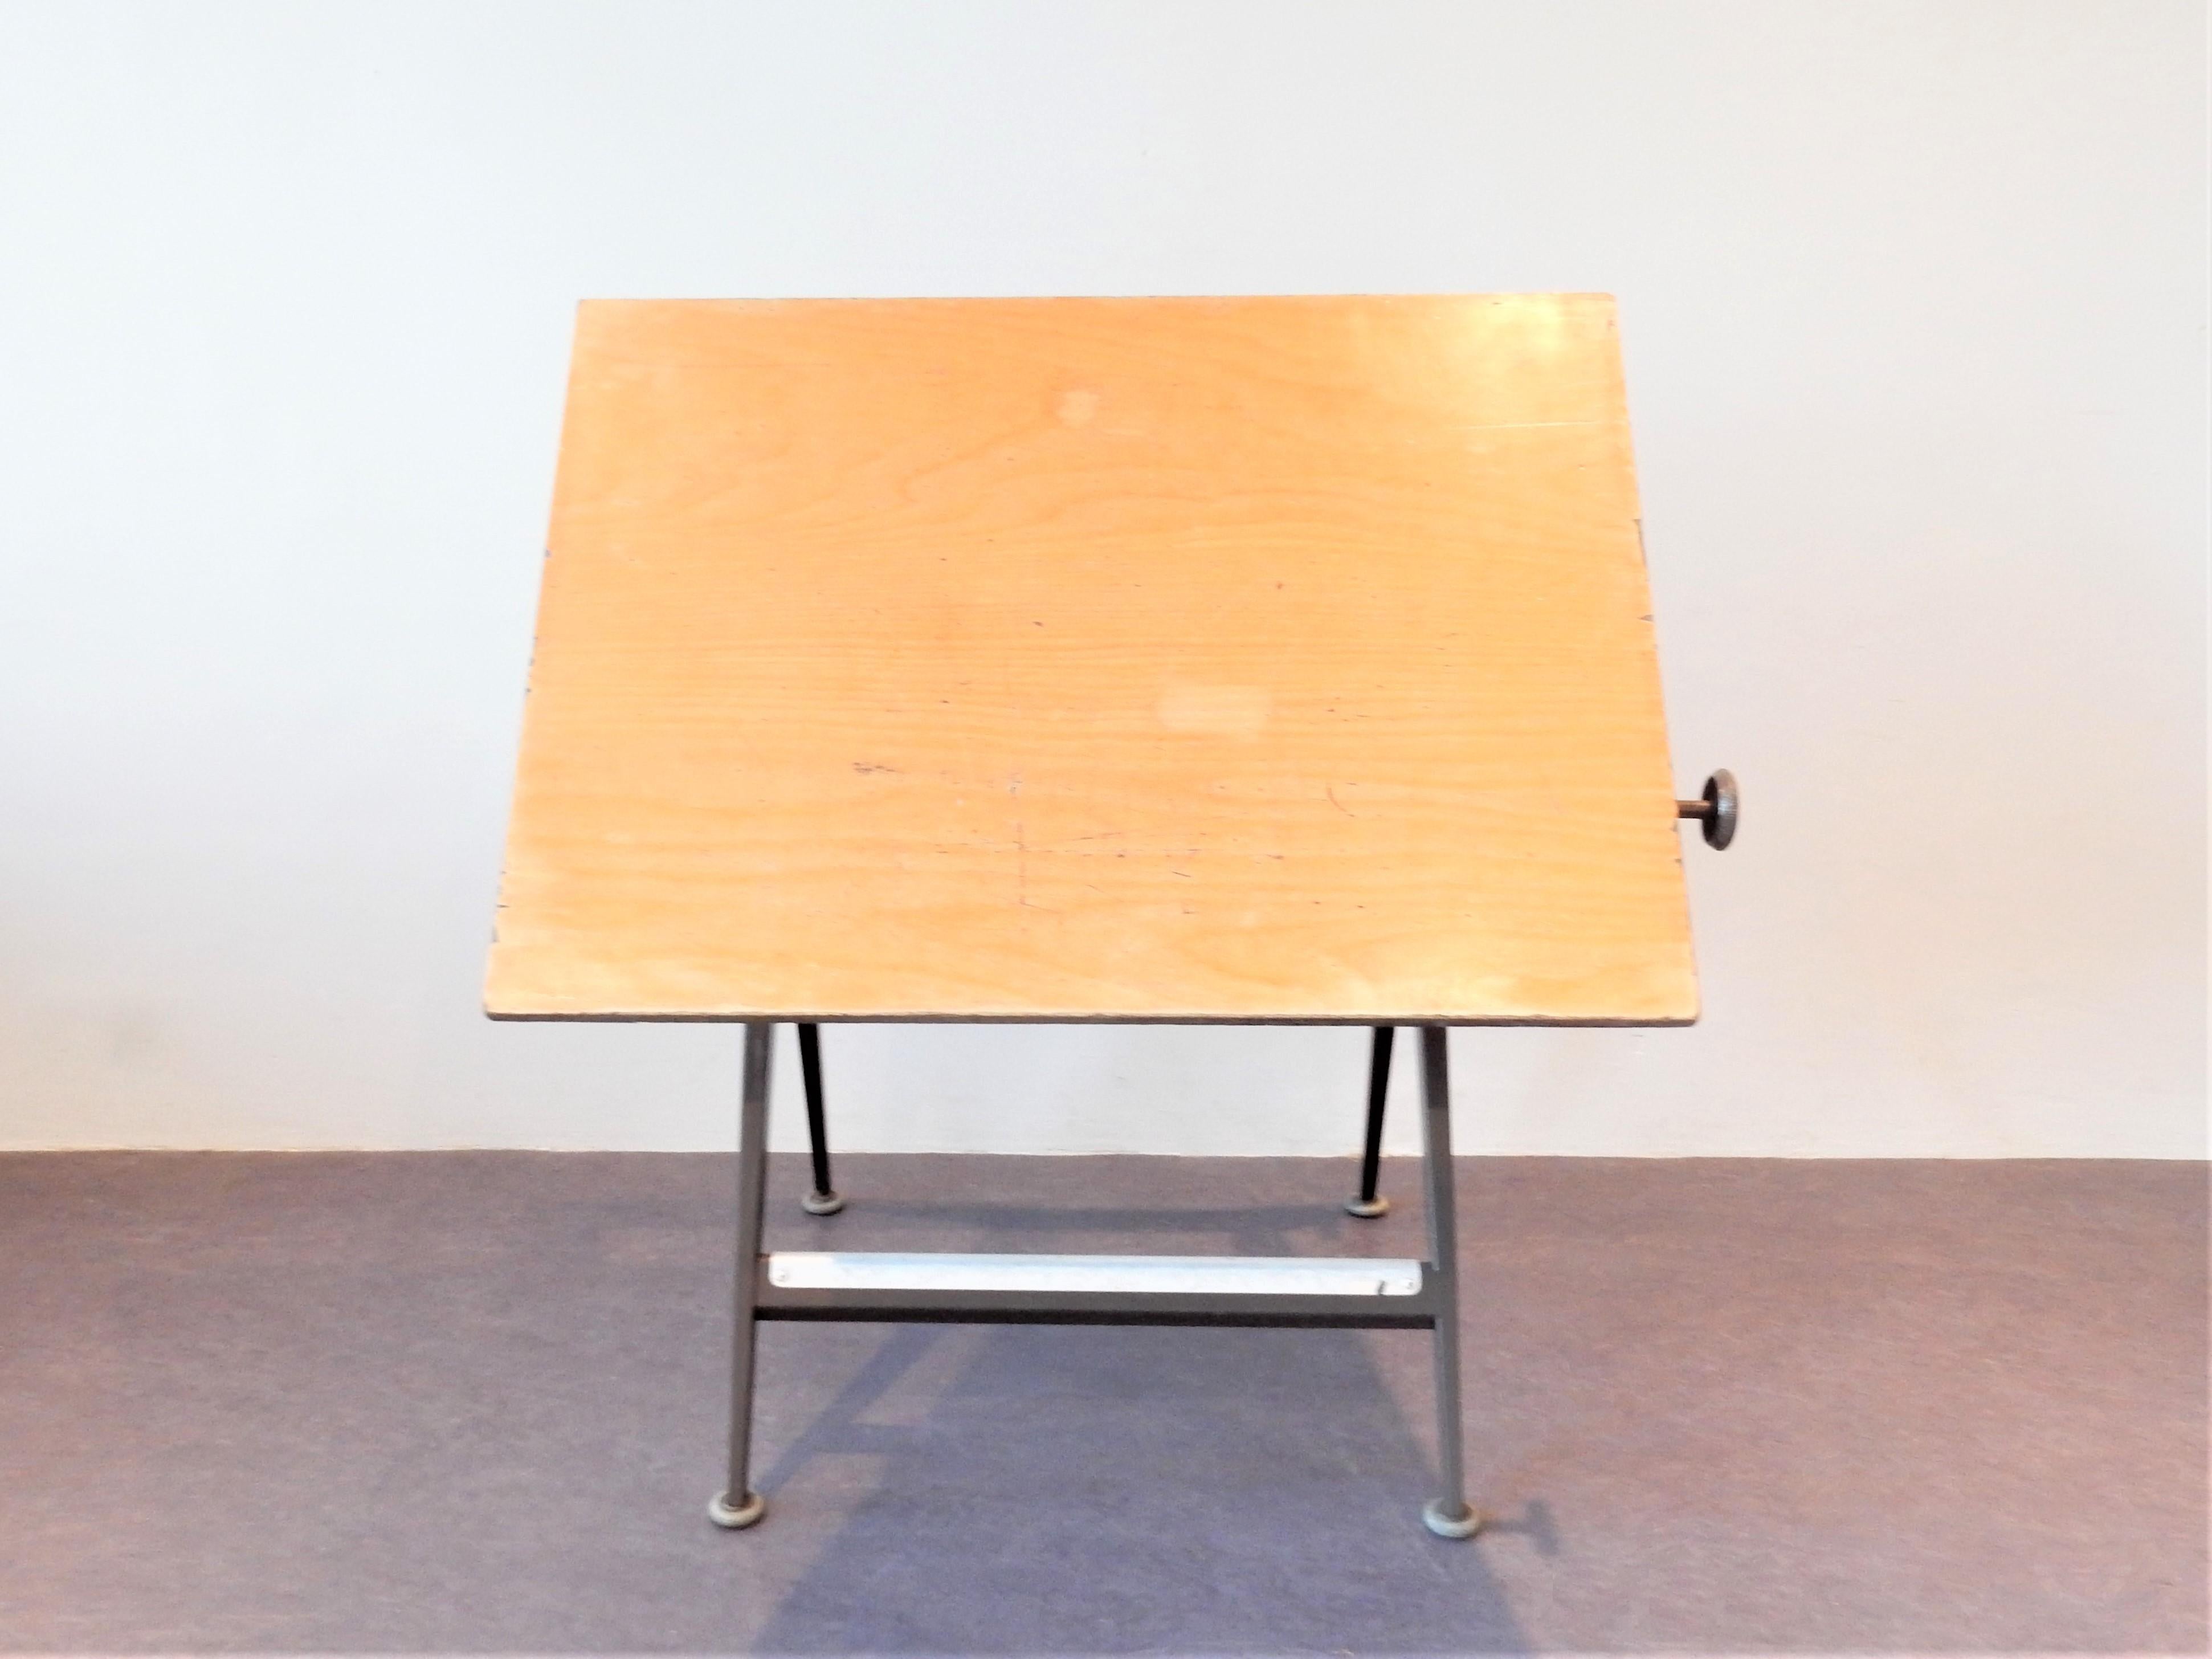 This 'Reply' drafting table was designed by Friso Kramer and Wim Rietveld for Ahrend de Cirkel in the 1950s. It has a brown lacquered steel frame and a ply wooden top that is adjustable from vertical to horizontal position by 2 rotary knobs. We have